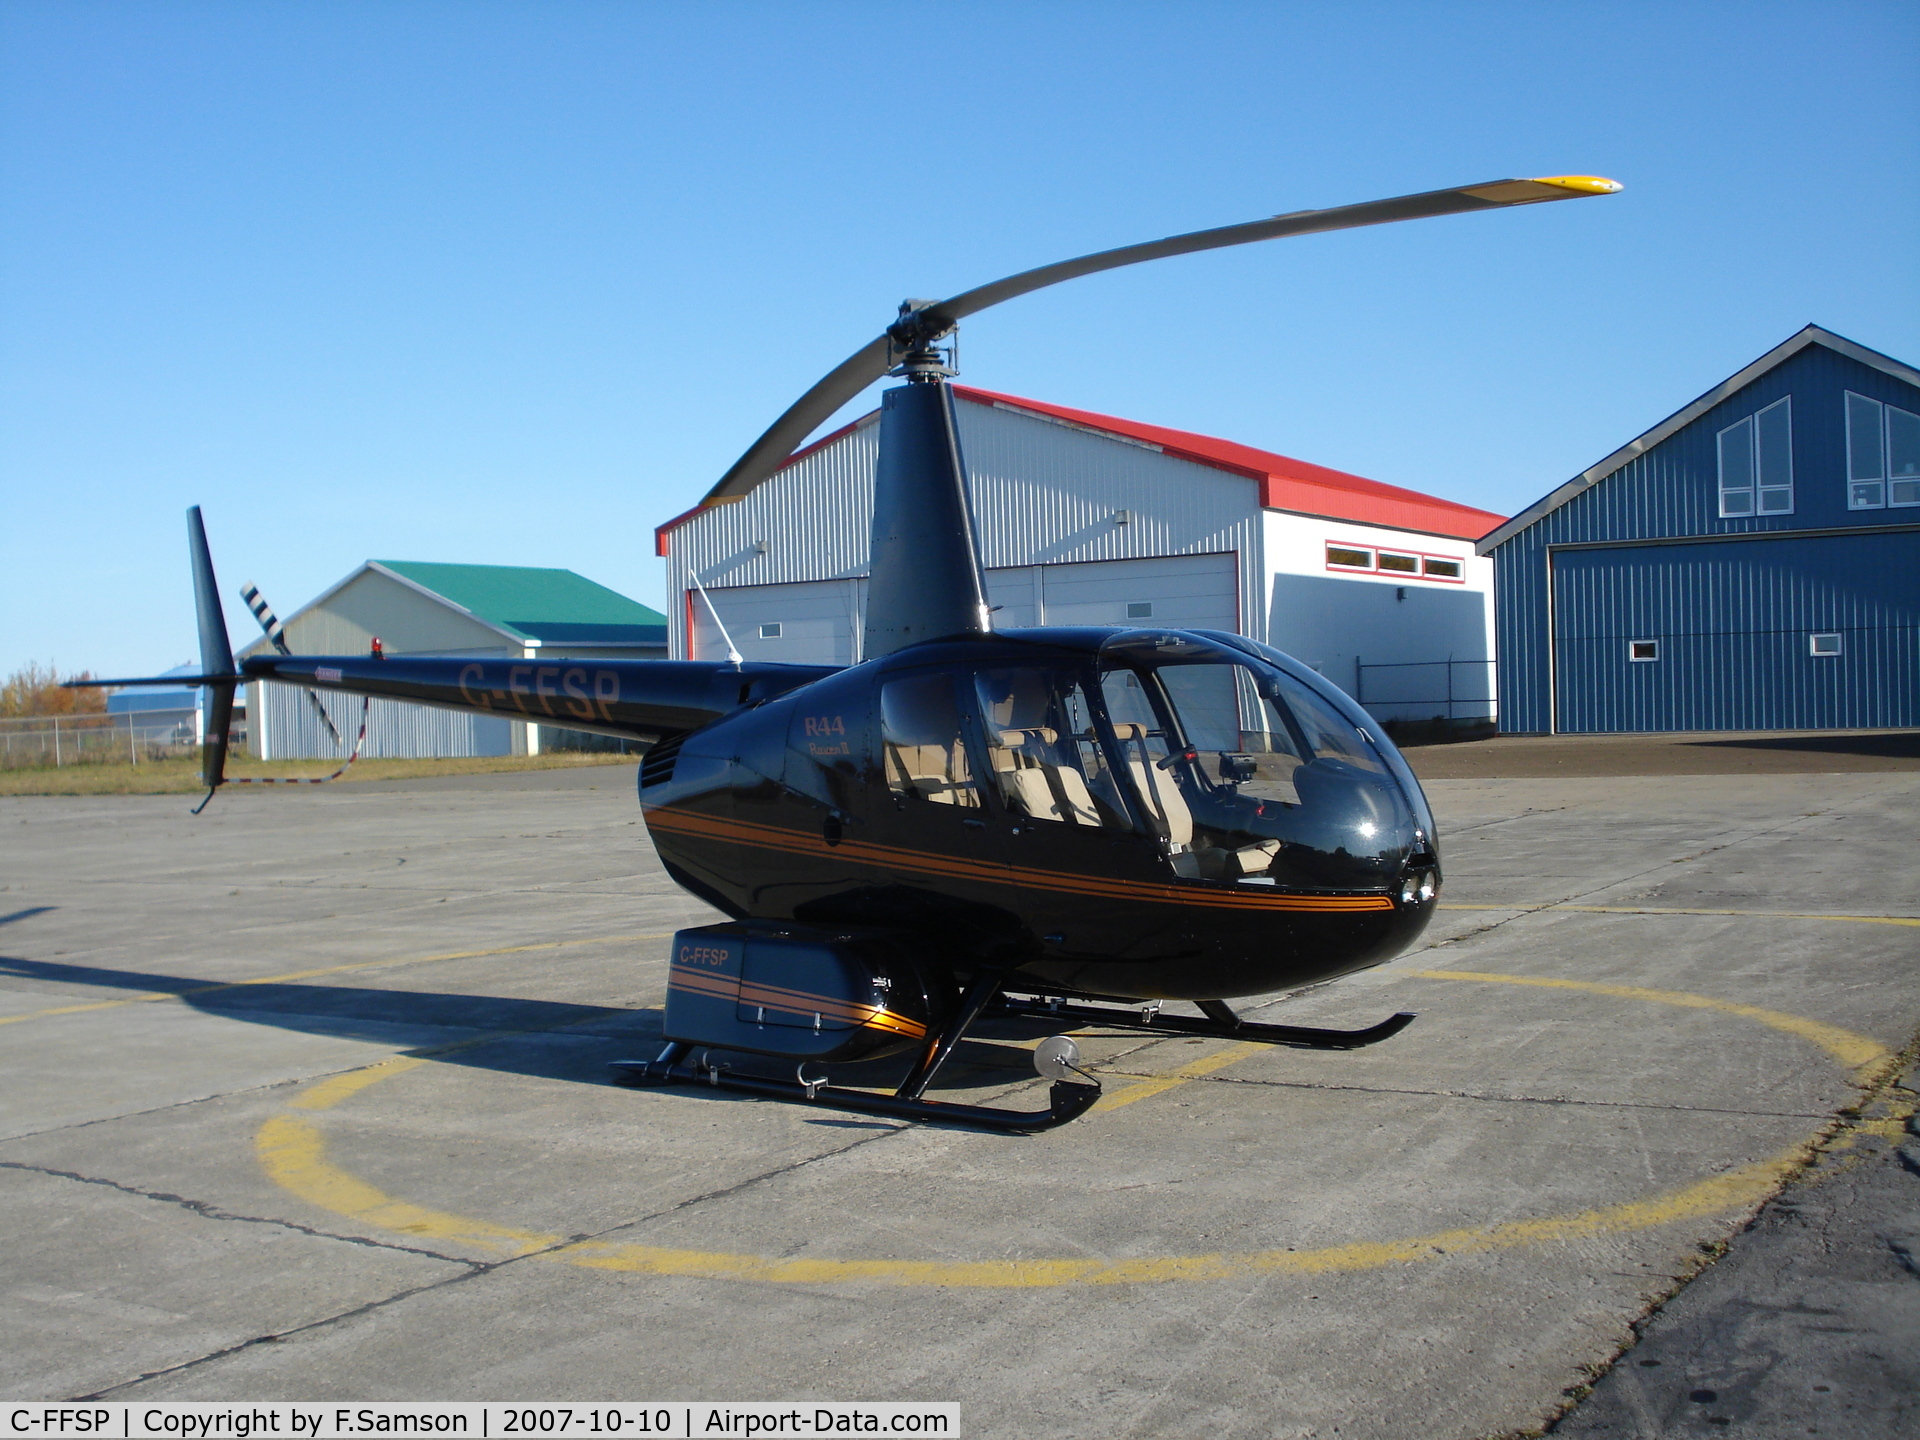 C-FFSP, 2005 Robinson R44 II C/N 10906, At Riviere du Loup airport